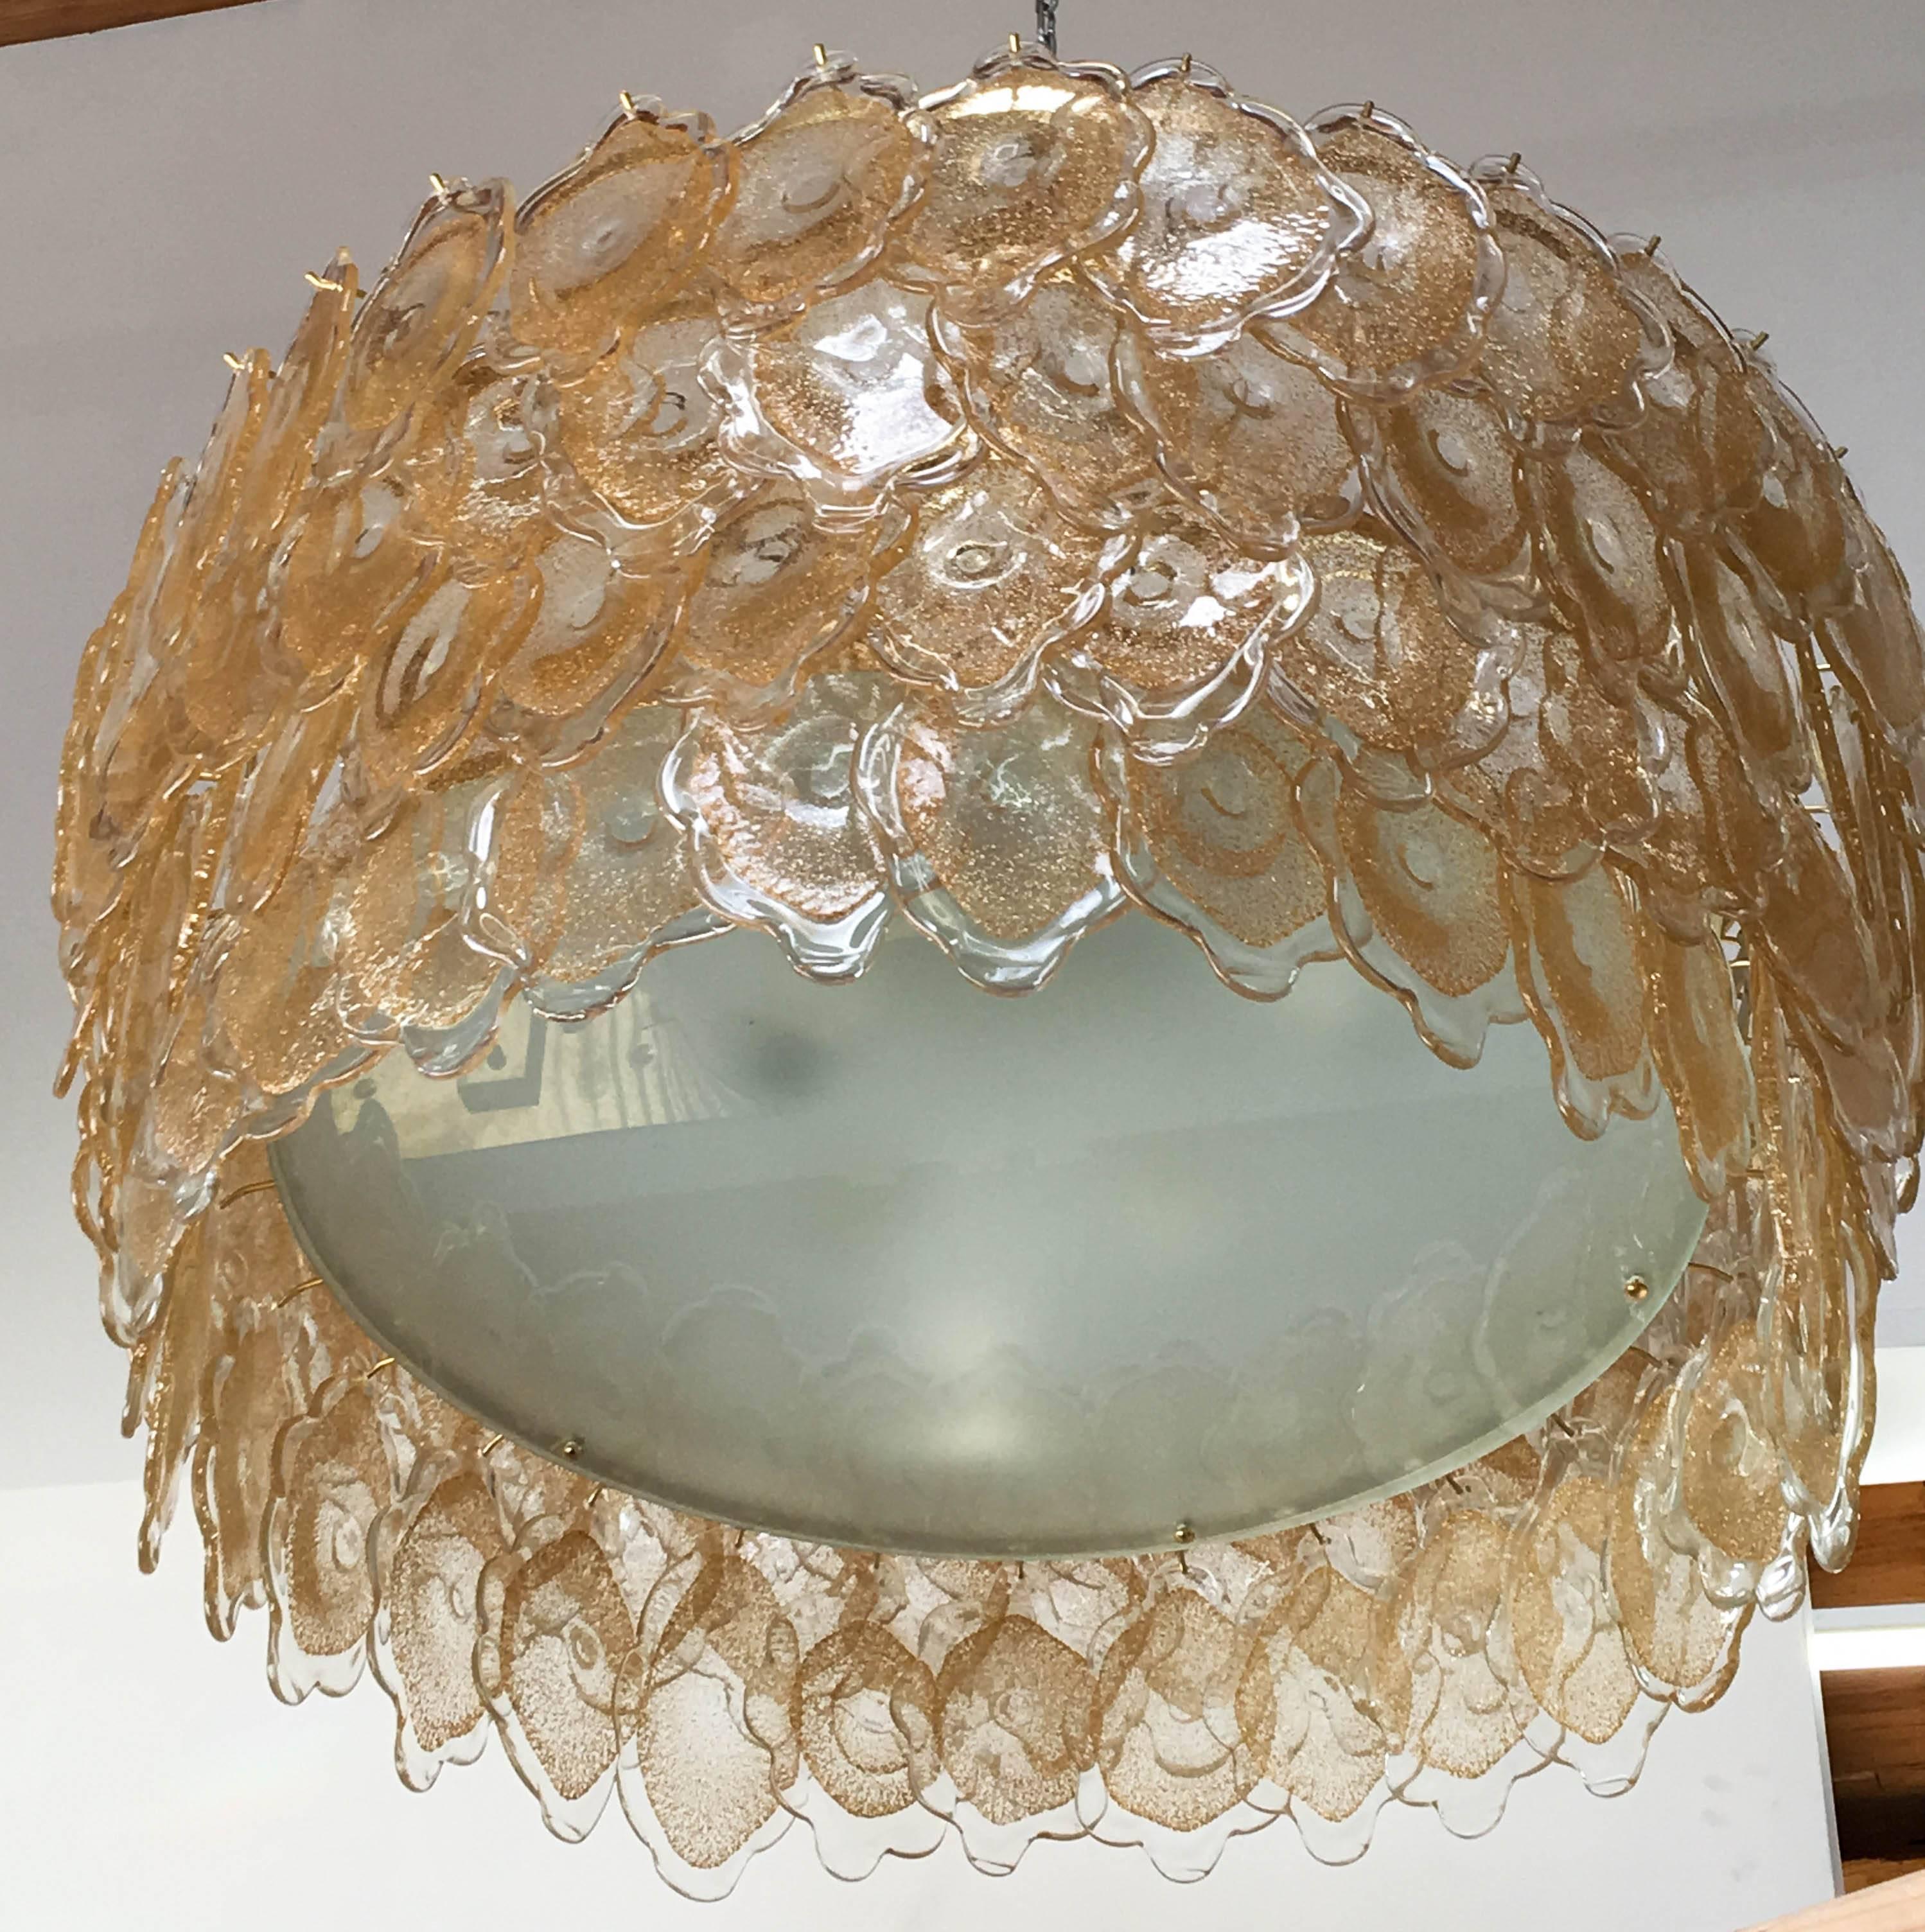 Vintage Italian chandelier with 128 uniquely hand blown 24 karat gold infused Murano glasses, mounted on a brass drum-shaped frame that creates a gold cloud effect, and frosted glass diffuser / Designed by Mazzega circa 1960’s / Made in Italy
12